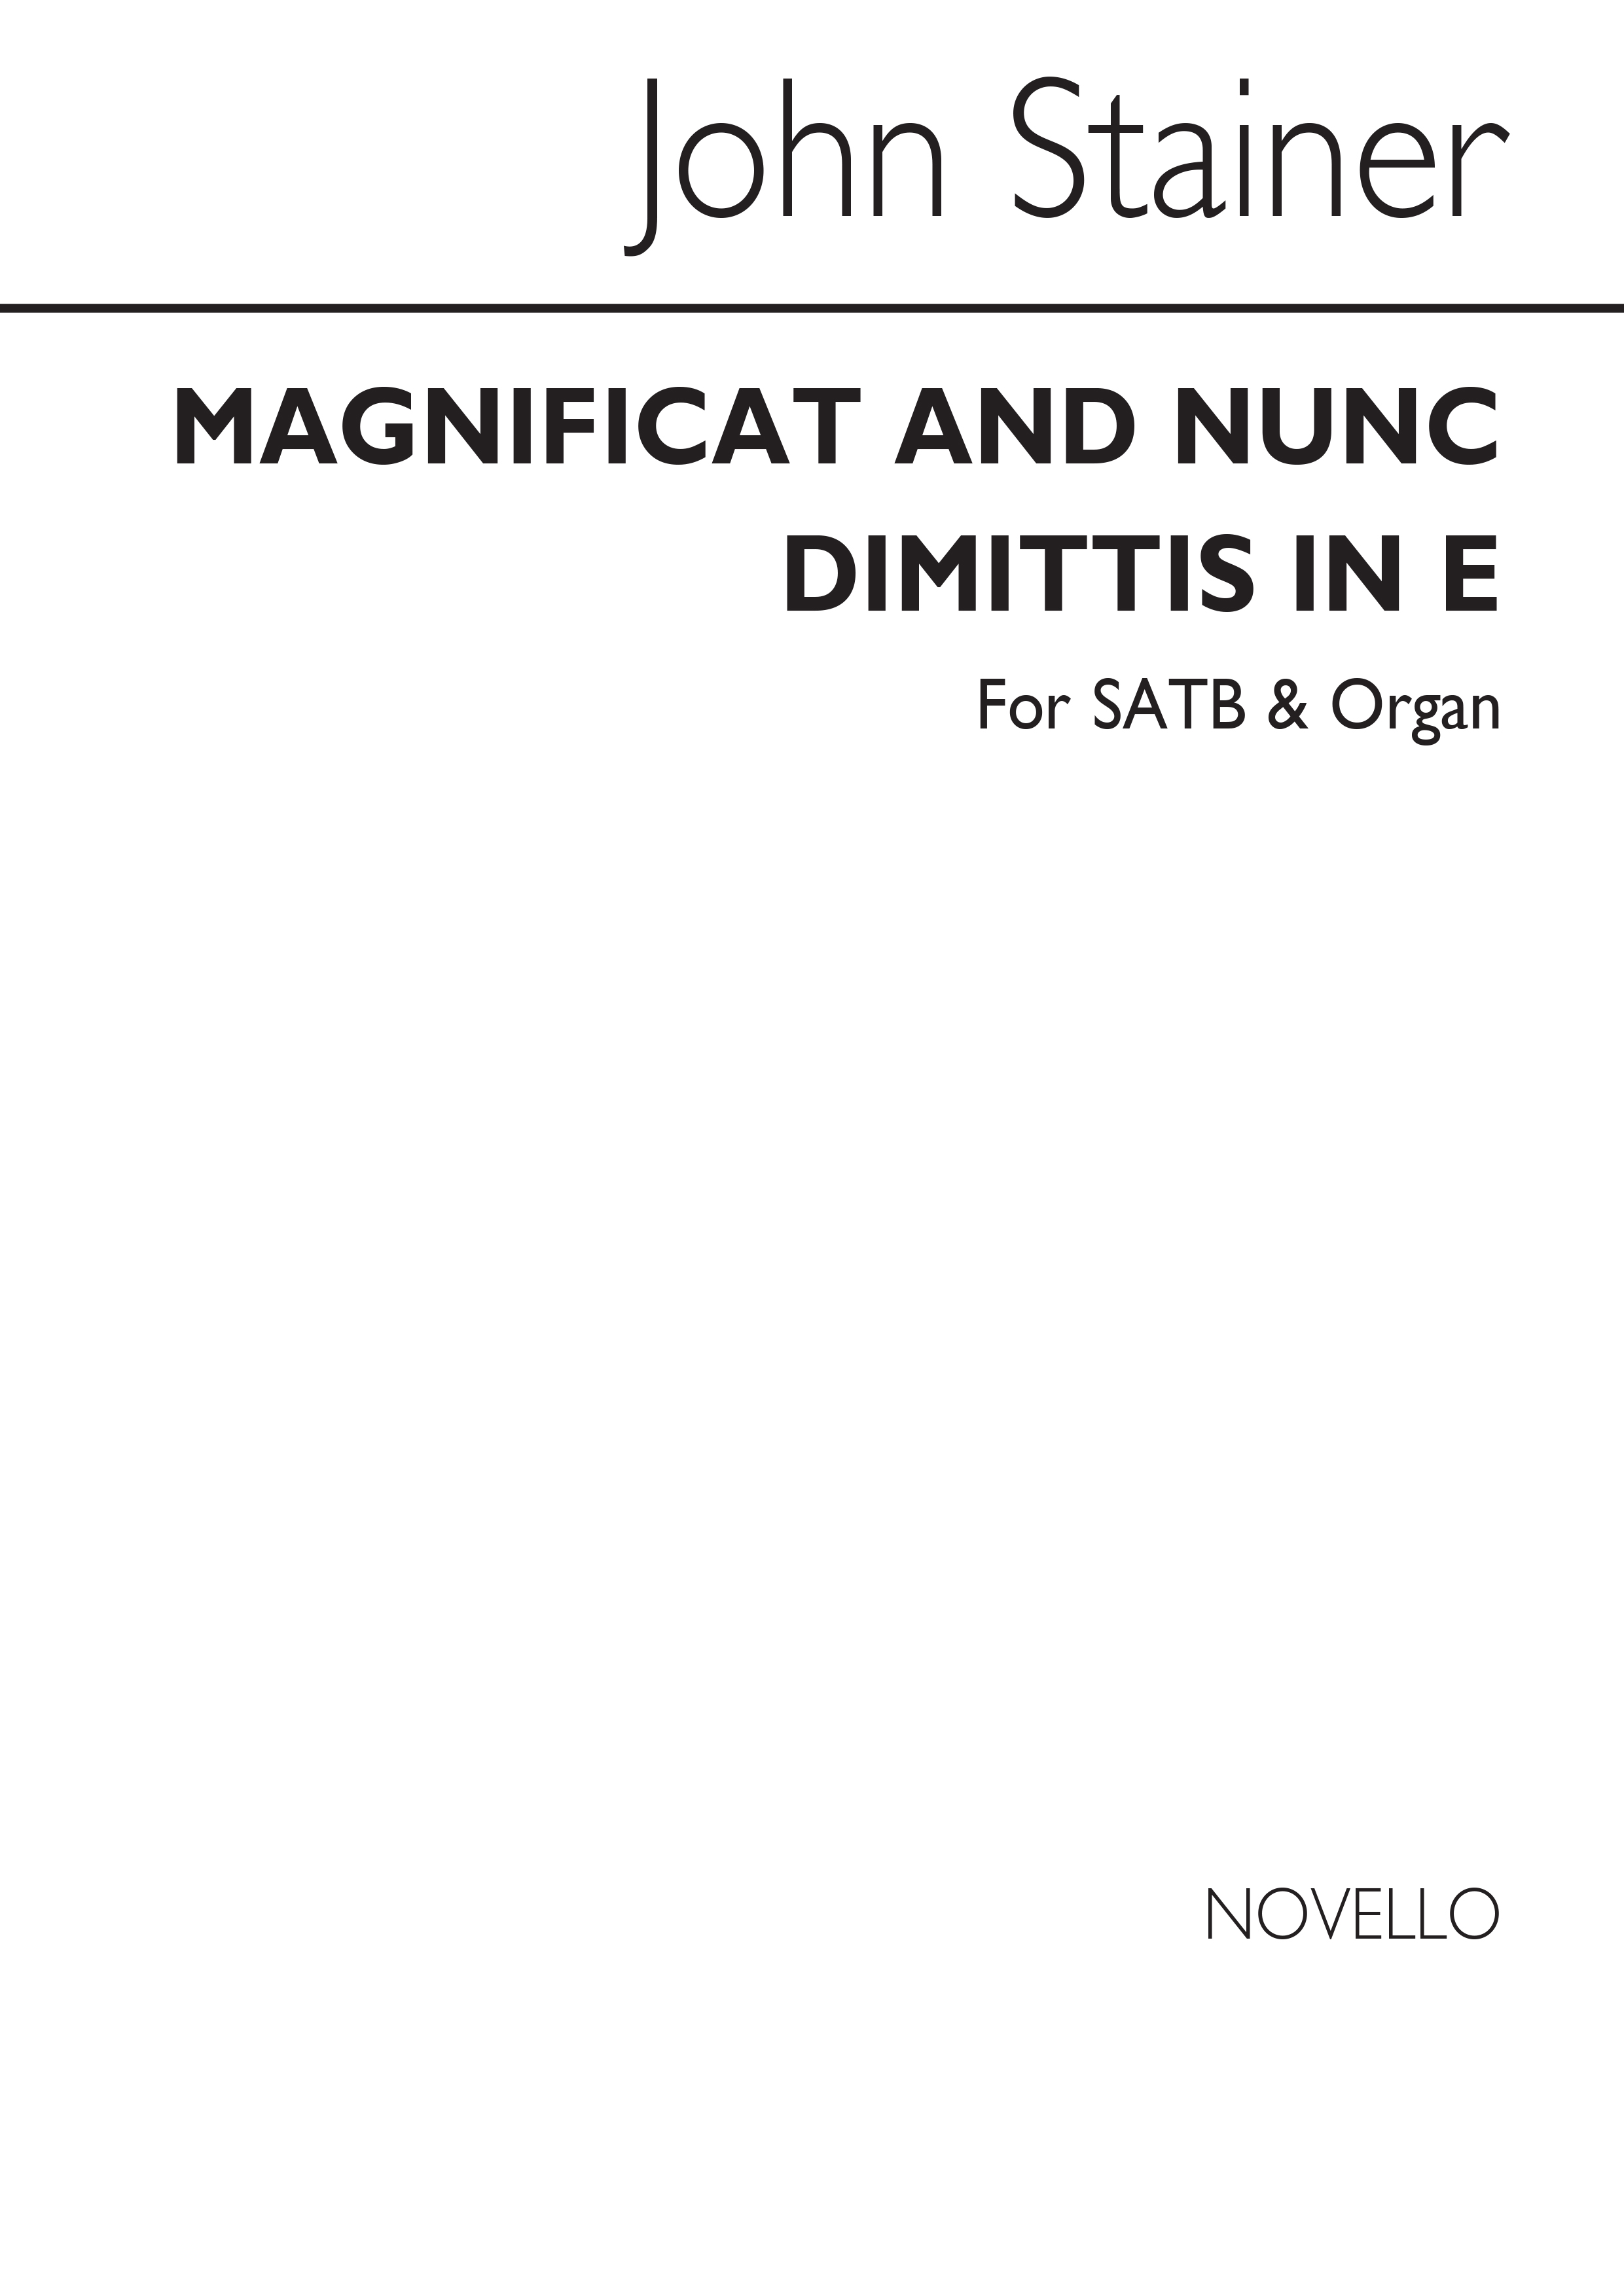 Sir John Stainer: Magnificat And Nunc Dimittis In E: SATB: Vocal Score